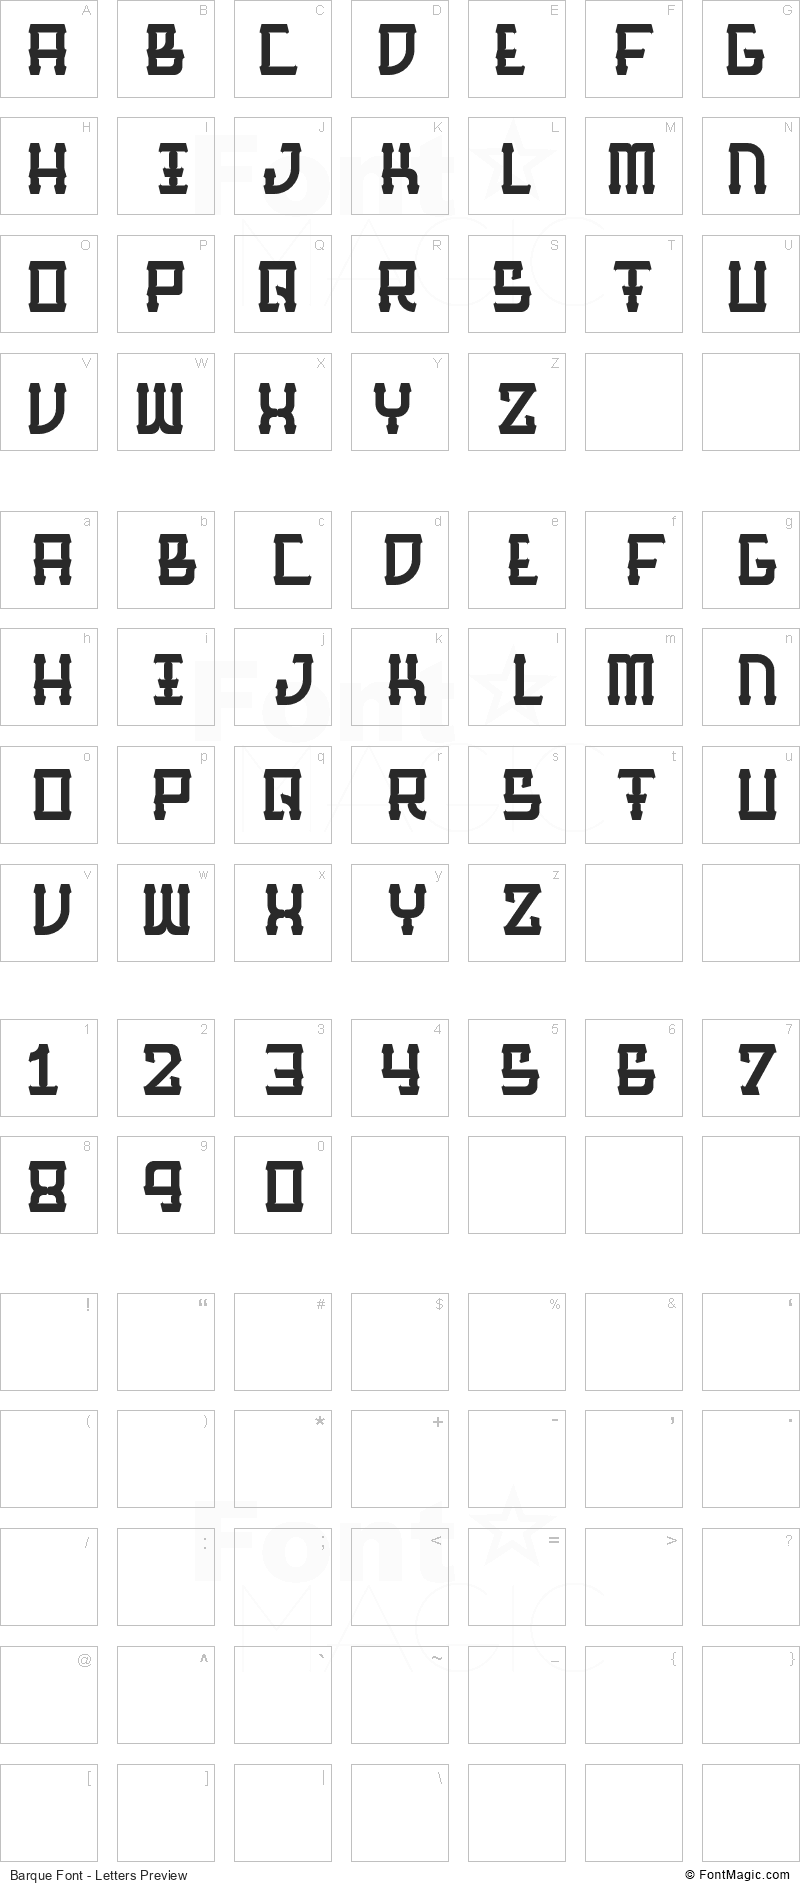 Barque Font - All Latters Preview Chart